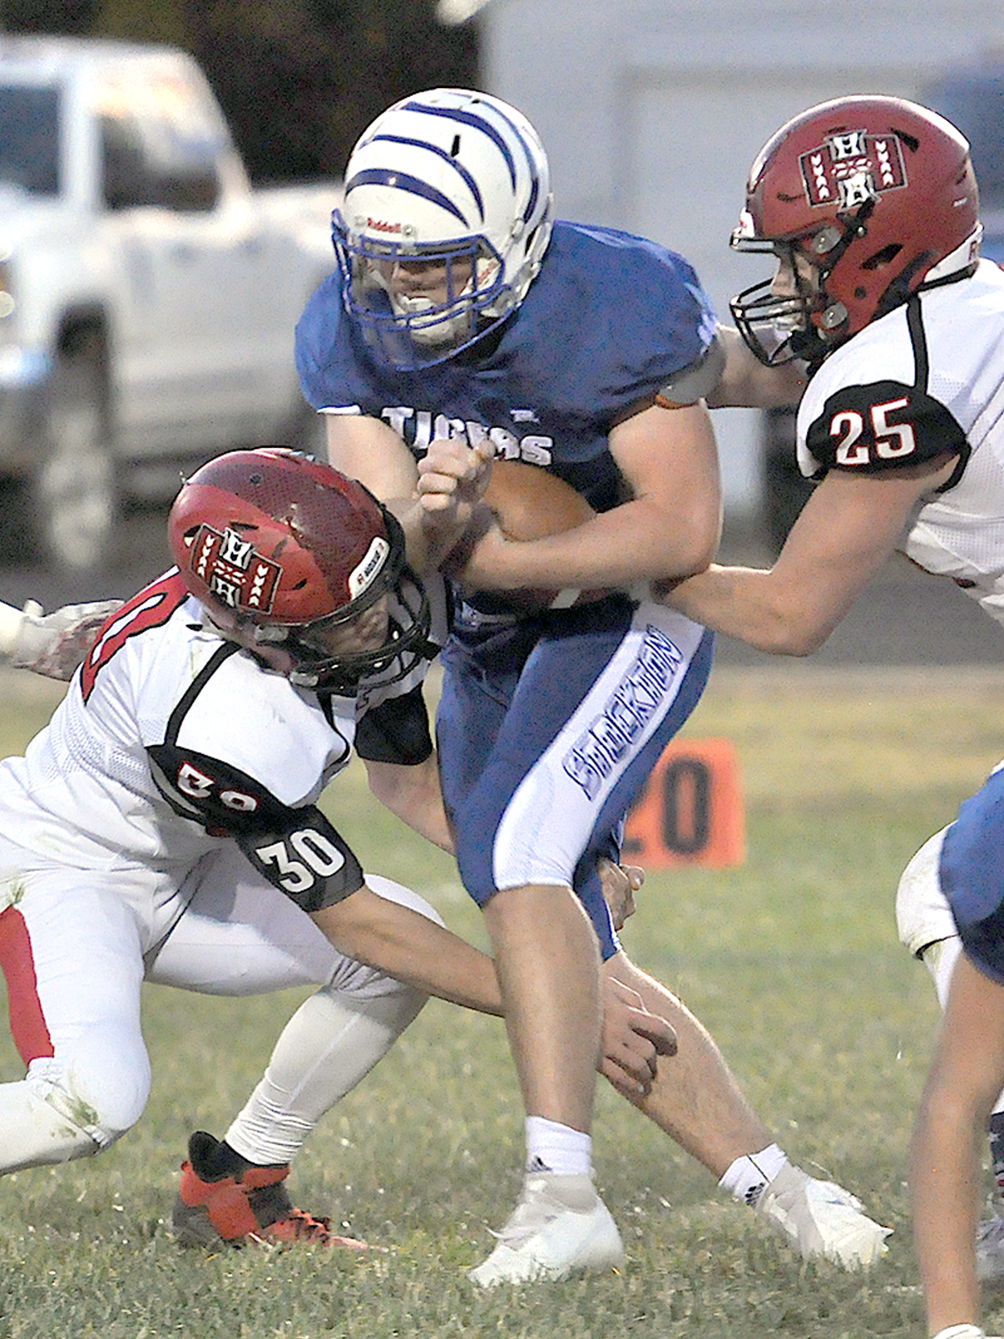 TROY ROGERS holds on tightly to the ball as he breaks the tackles of his Hoxie defendrs in the October 23 district match-up.